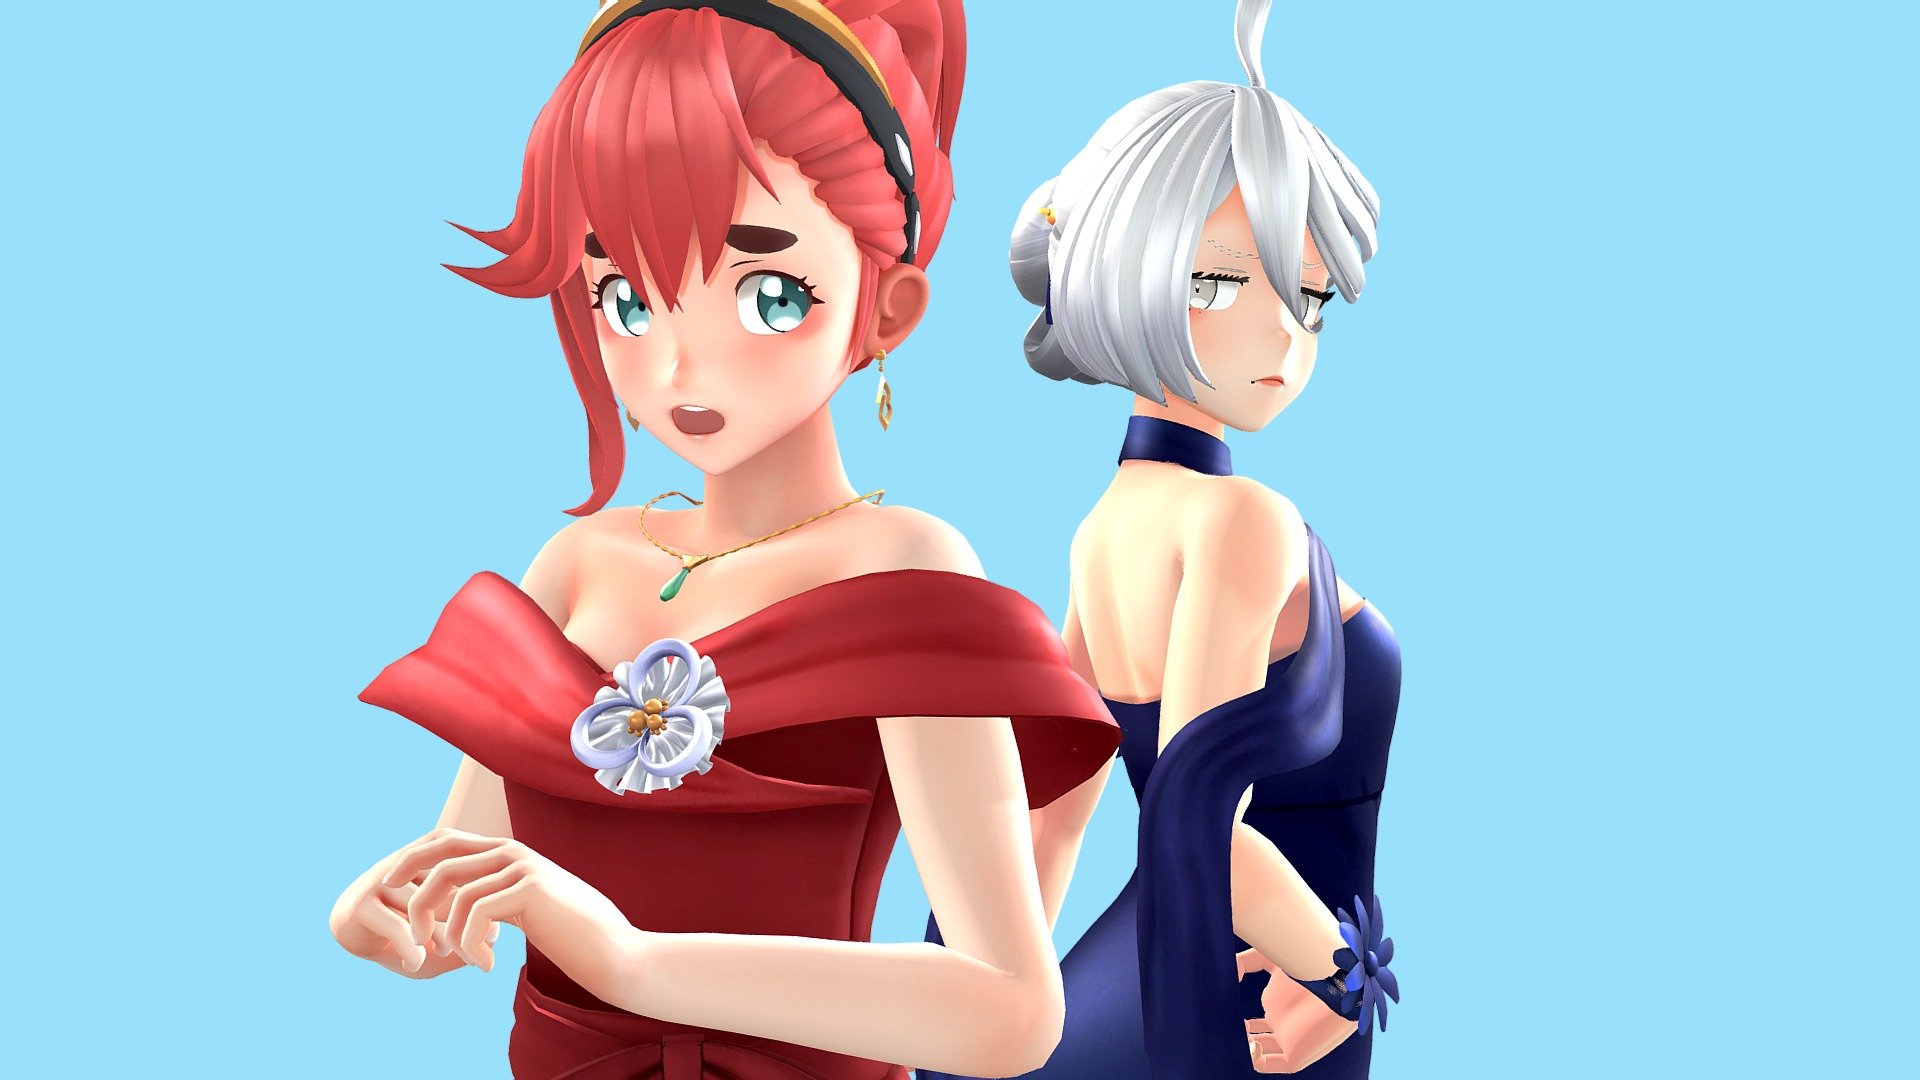 Suletta and Miorine from the show Mobile Suit Gundam: The Witch from Mercury,

蘇萊塔跟米米的禮服版 - Suletta and Miorine - 3D model by hwahaha418 3d model